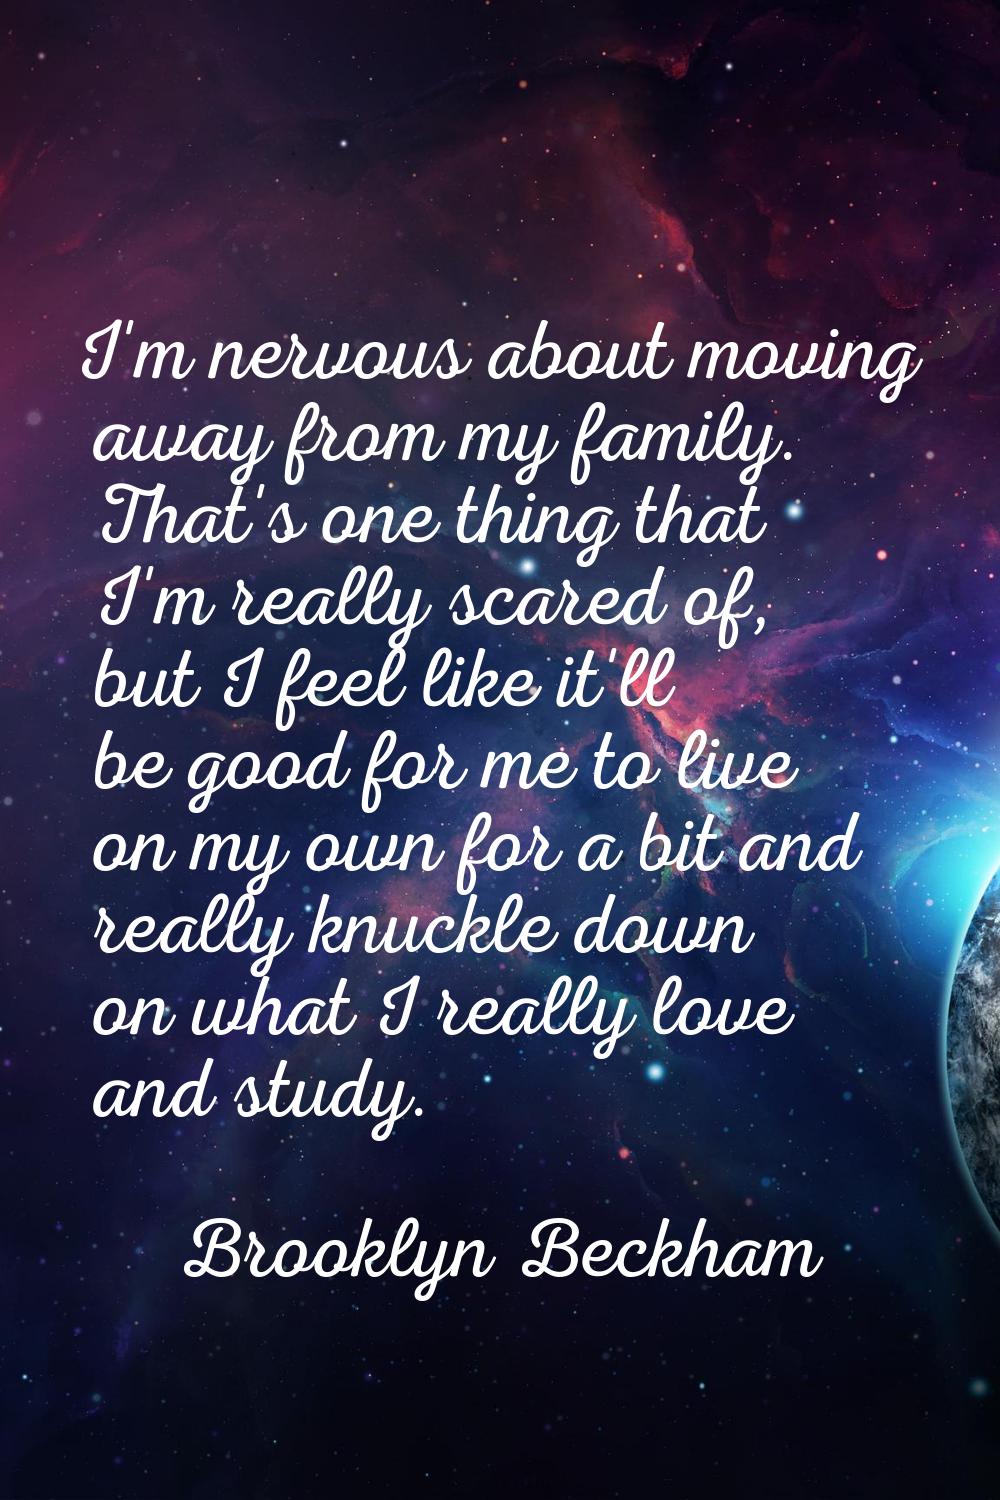 I'm nervous about moving away from my family. That's one thing that I'm really scared of, but I fee